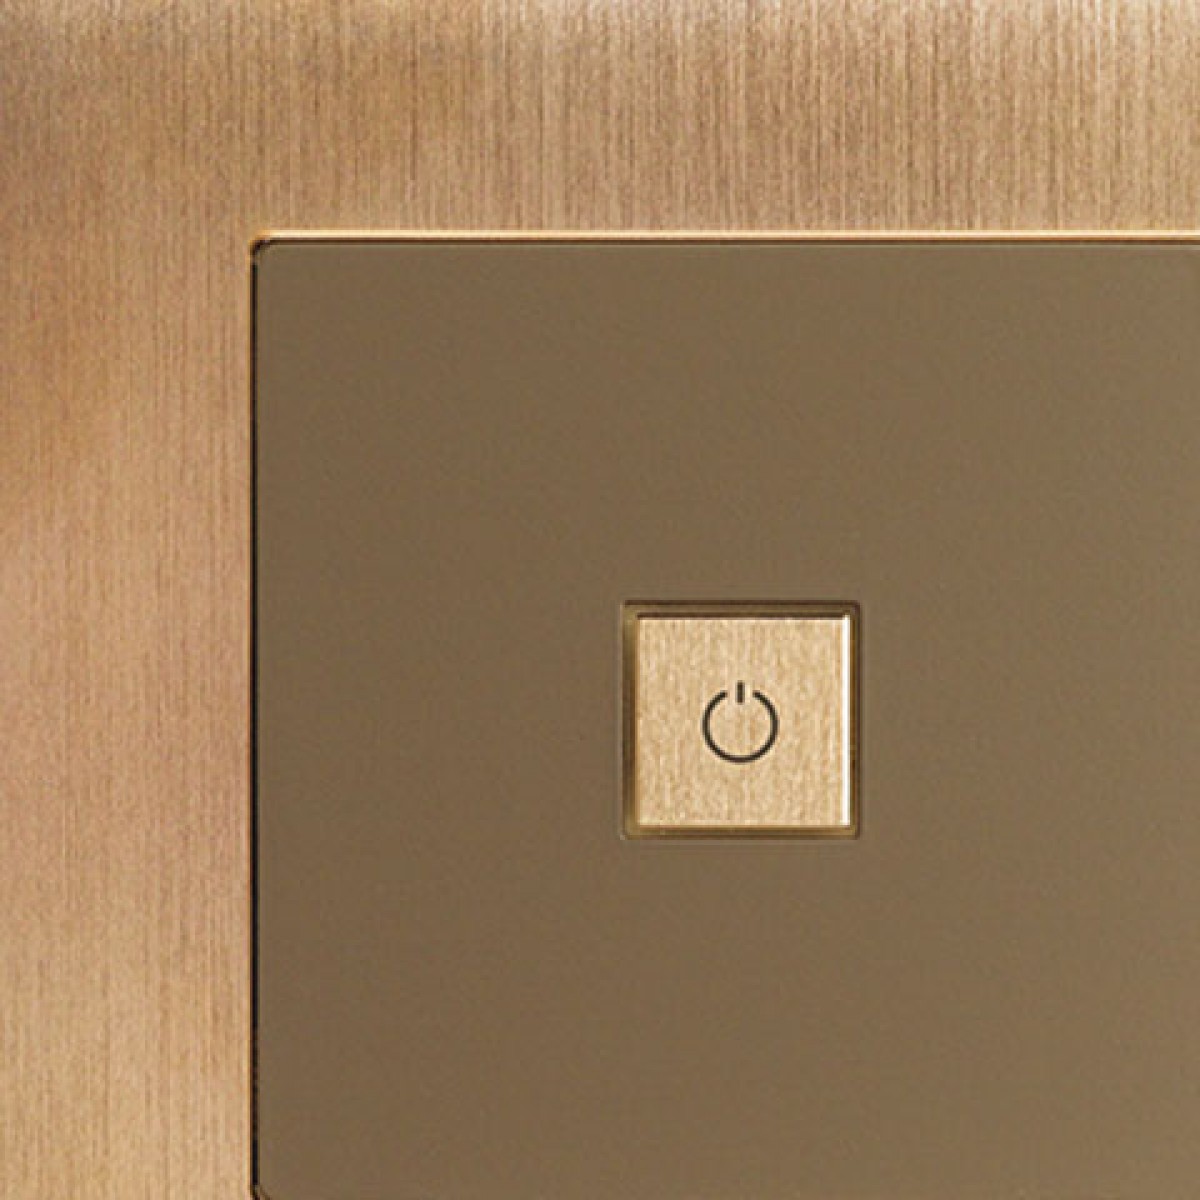 00 Kachel milani design consulting agency feller product lightswitch interior hospitality